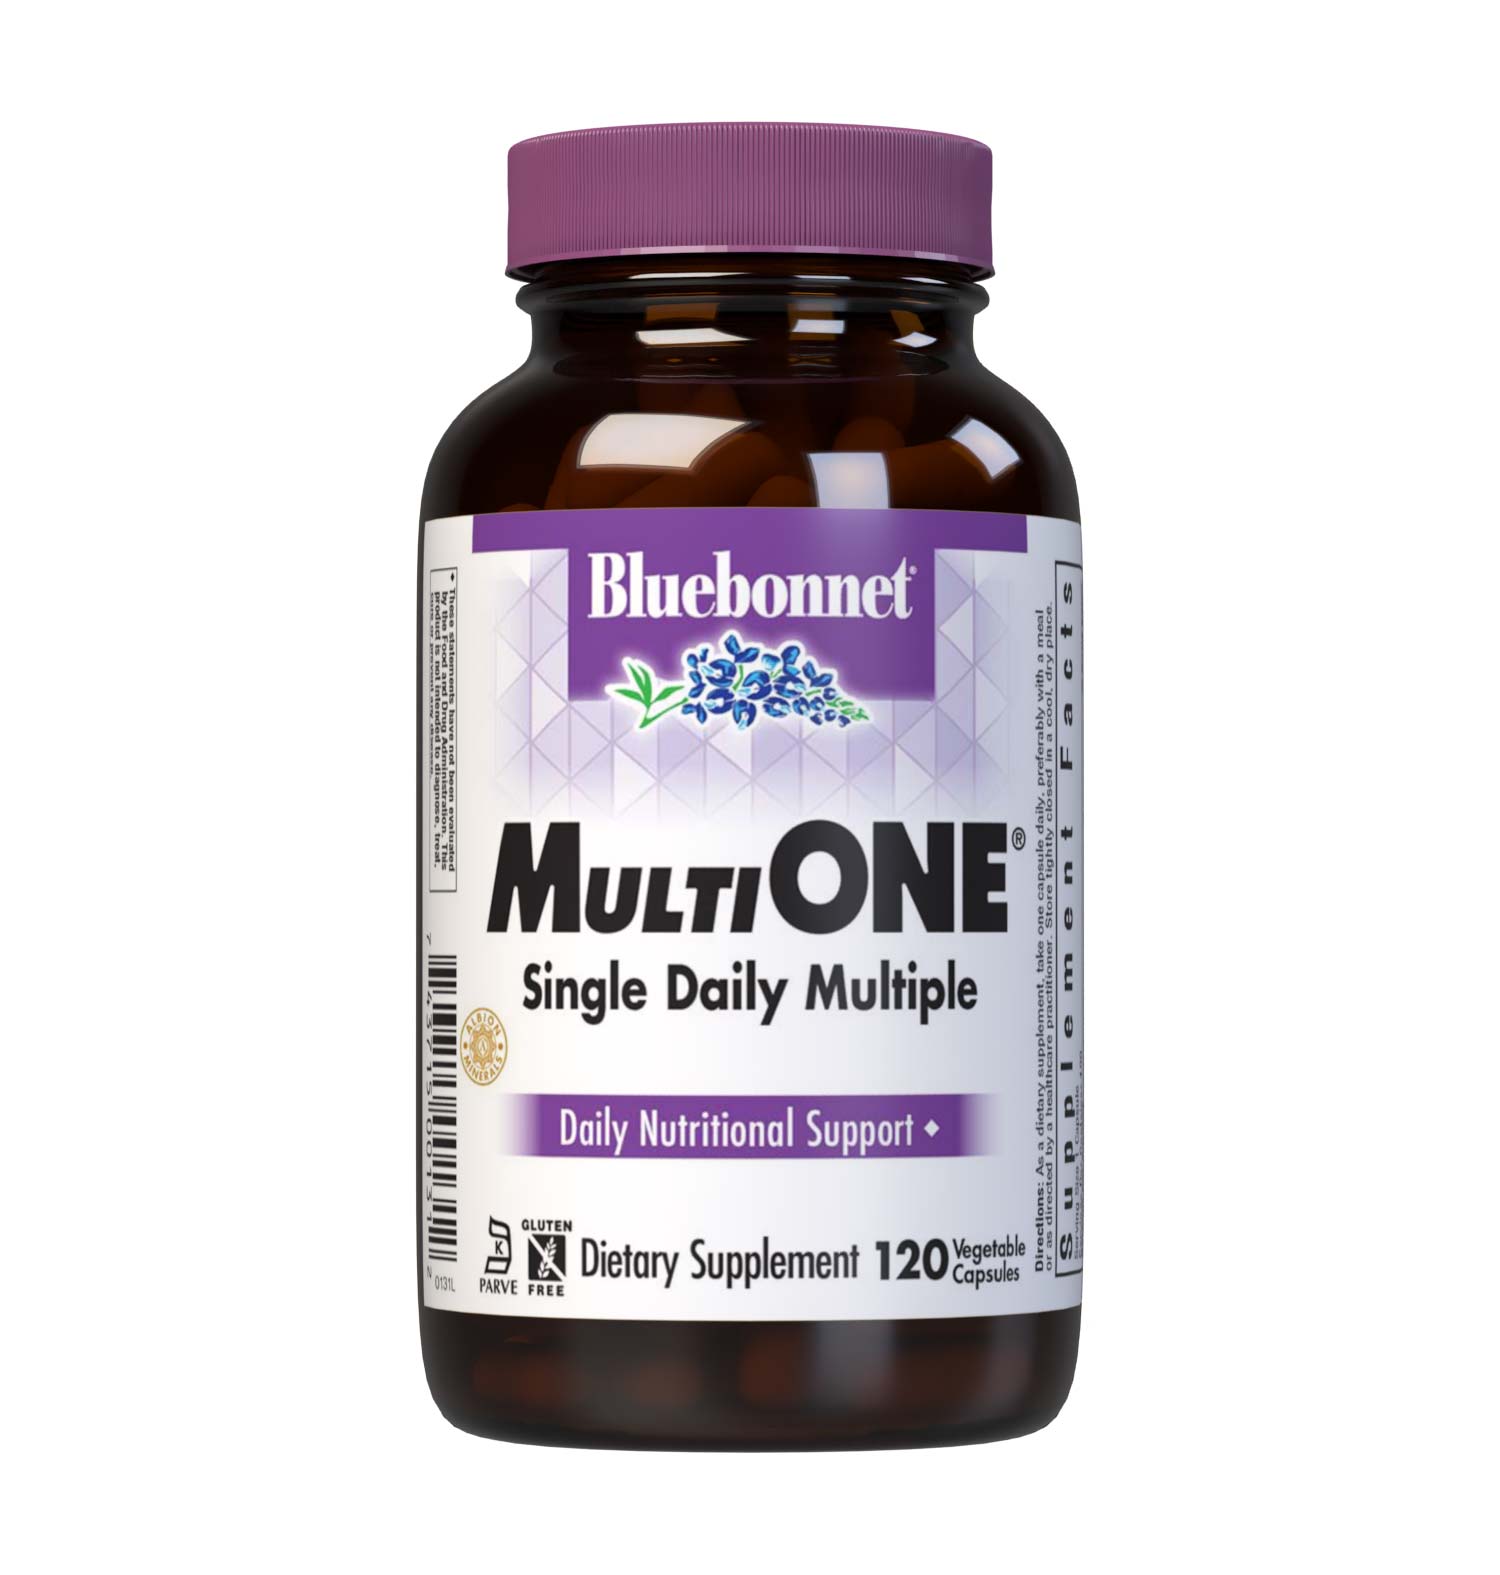 Bluebonnet’s Multi One Formula 120 Vegetable Capsules is a single daily multivitamin and multimineral dietary supplement in an easy-to-swallow, two-piece vegetable capsule and is formulated with highly efficient, patented Albion chelated minerals and popular carotenoids, such as beta carotene and FloraGLO lutein from marigold extract. #size_120 count